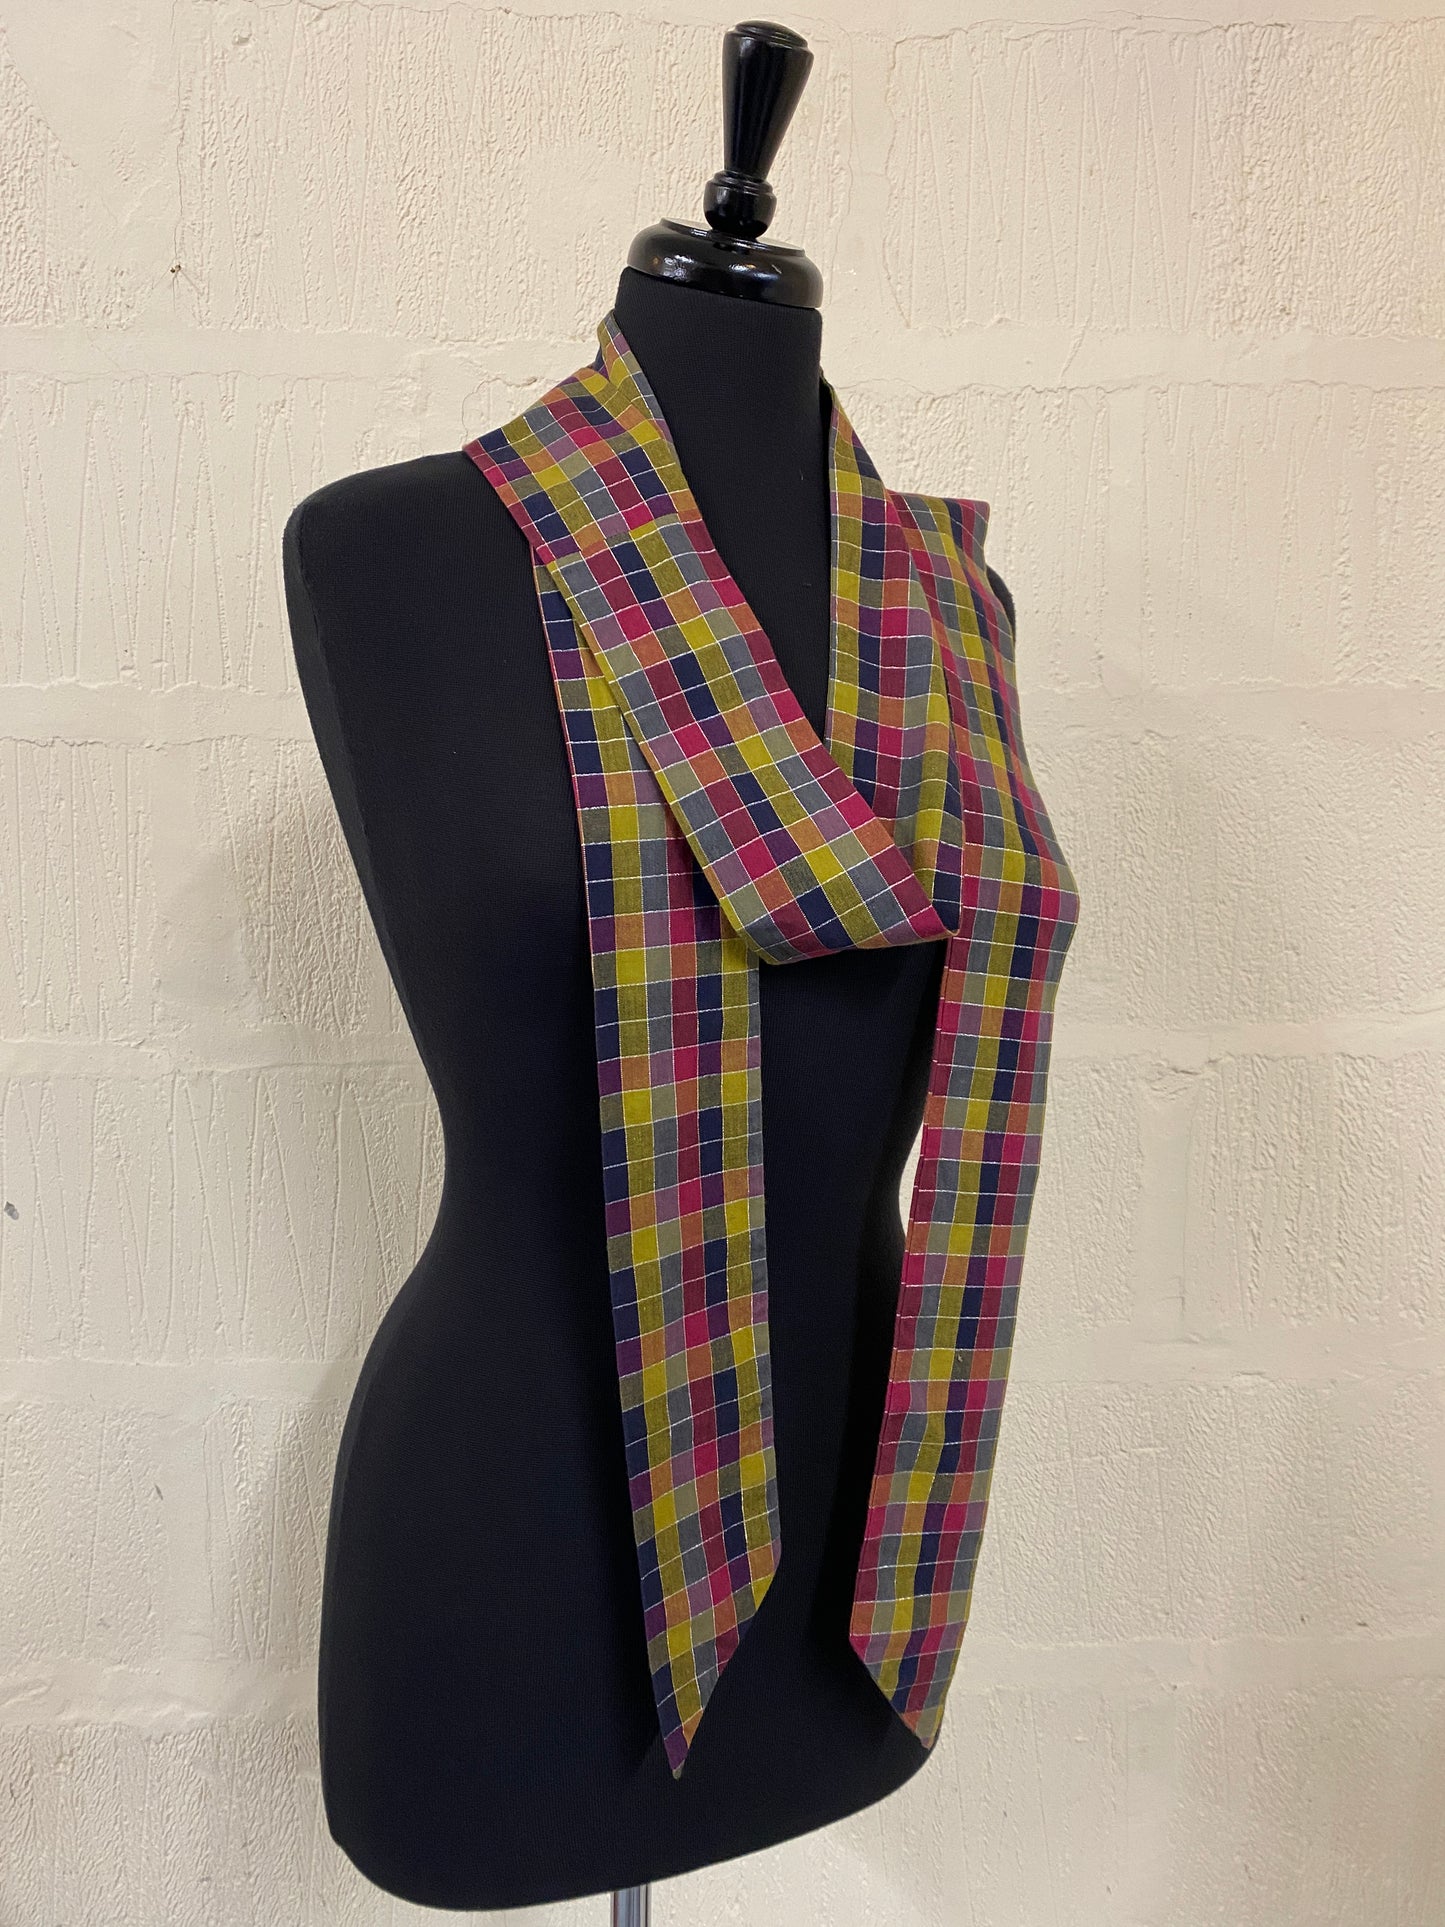 Hand made Multi Colour Check with Silver Thread Shacket Blouse.  Size 14